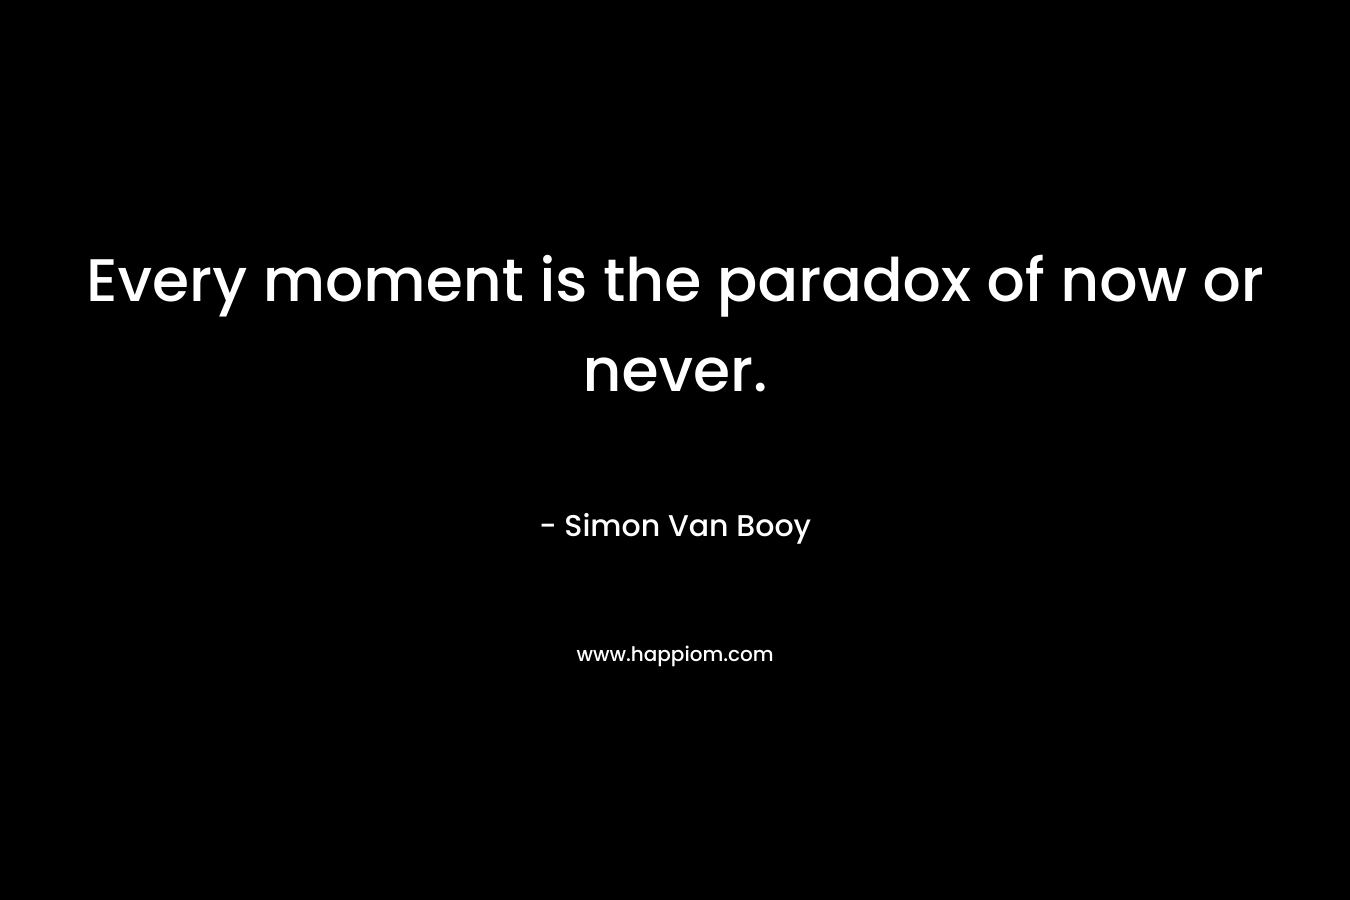 Every moment is the paradox of now or never.